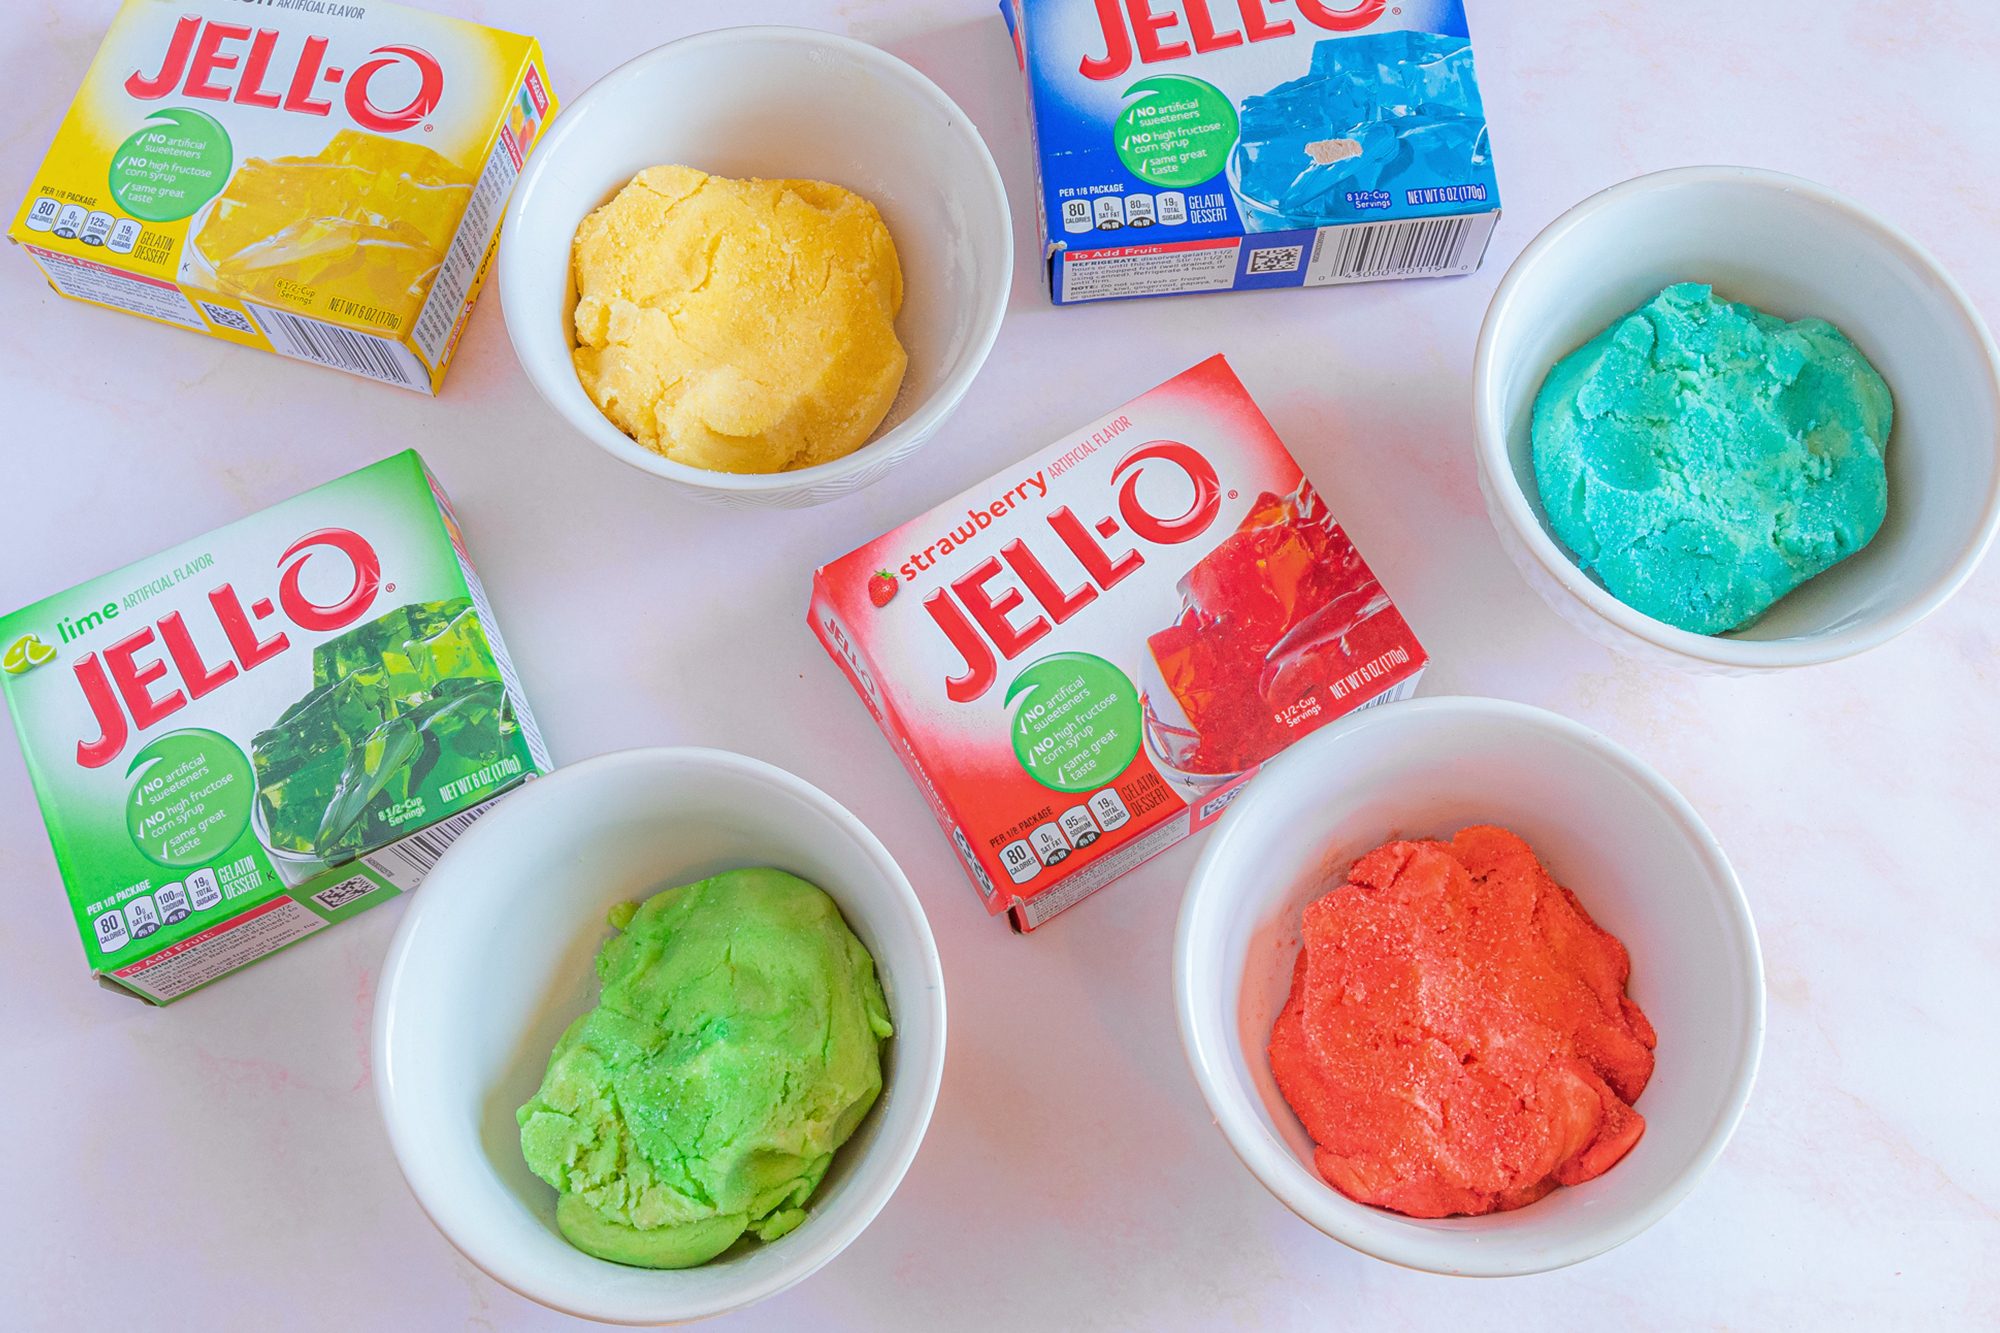  We Baked the Simple Jell-O Cookies That People Cant Stop Talking About